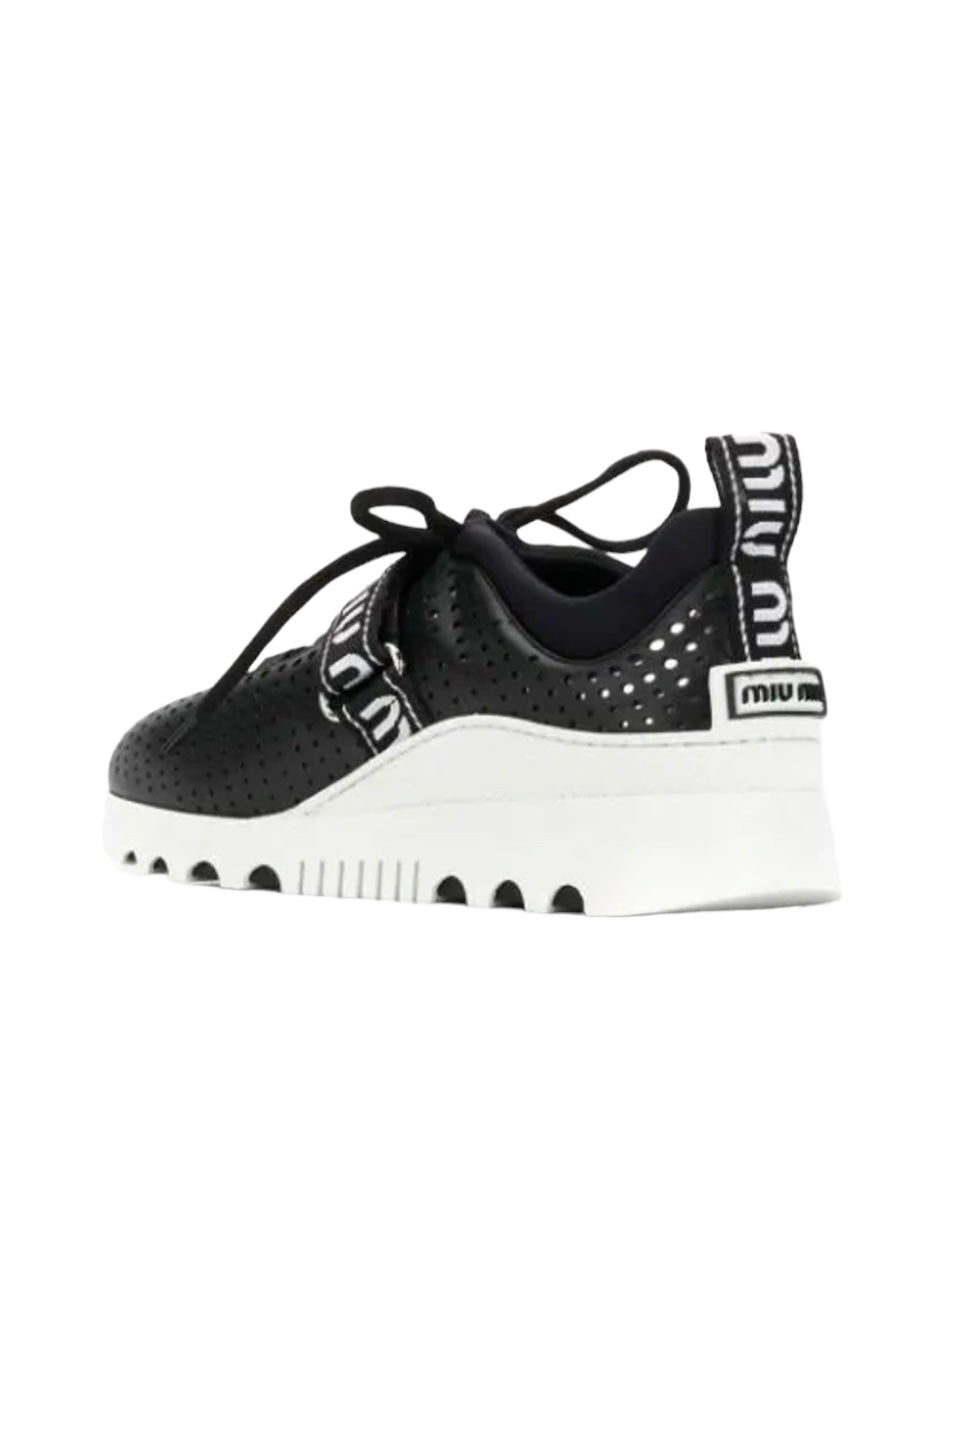 Perforated Black Leather Sneakers - 37.5